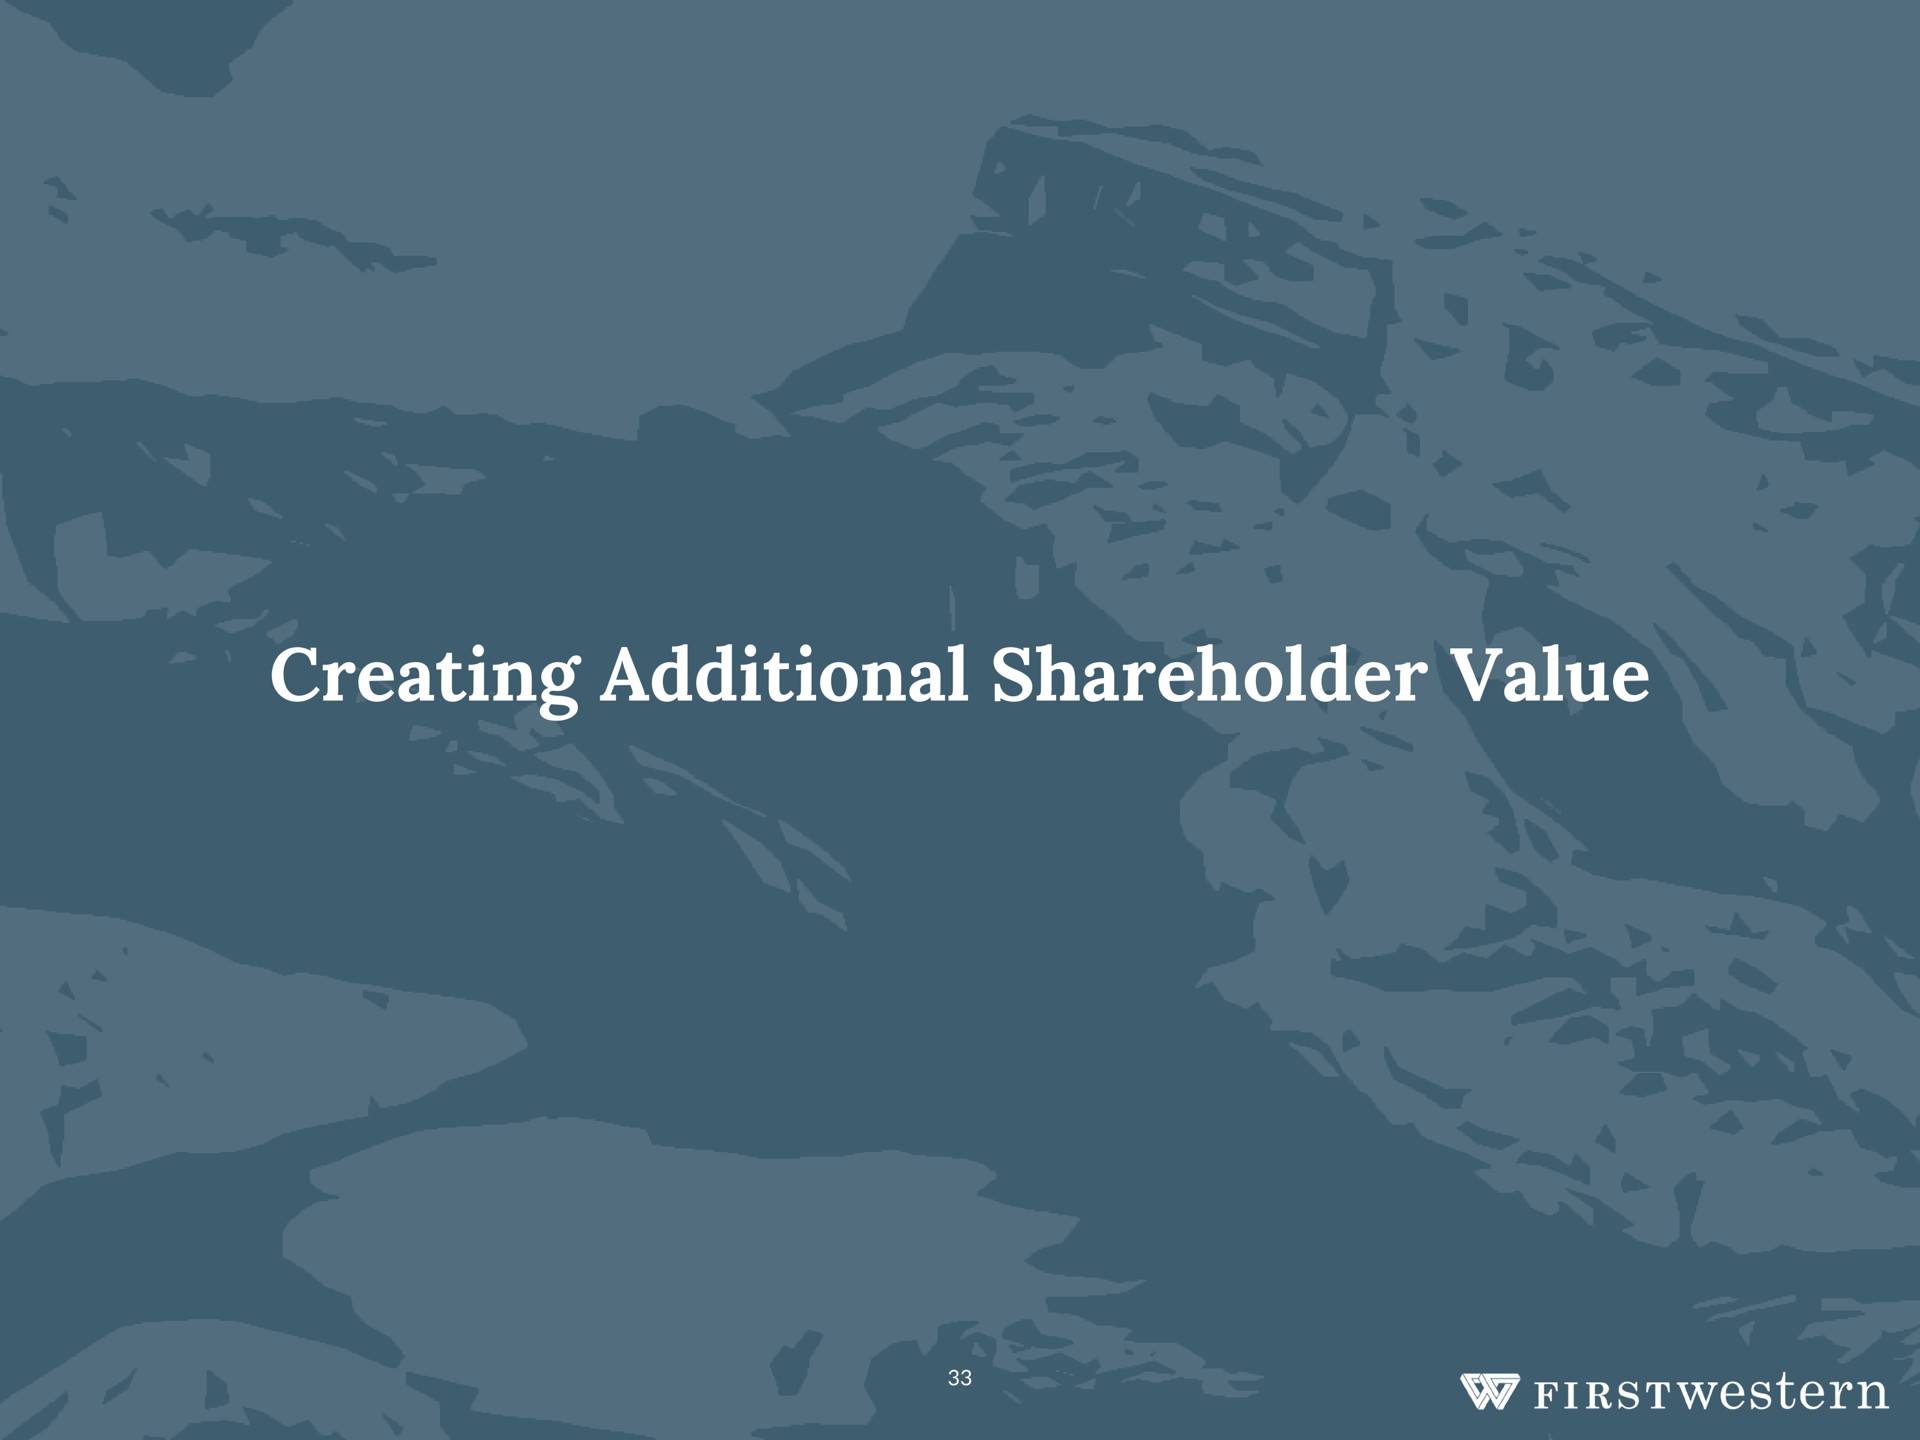 creating additional shareholder value | First Western Financial